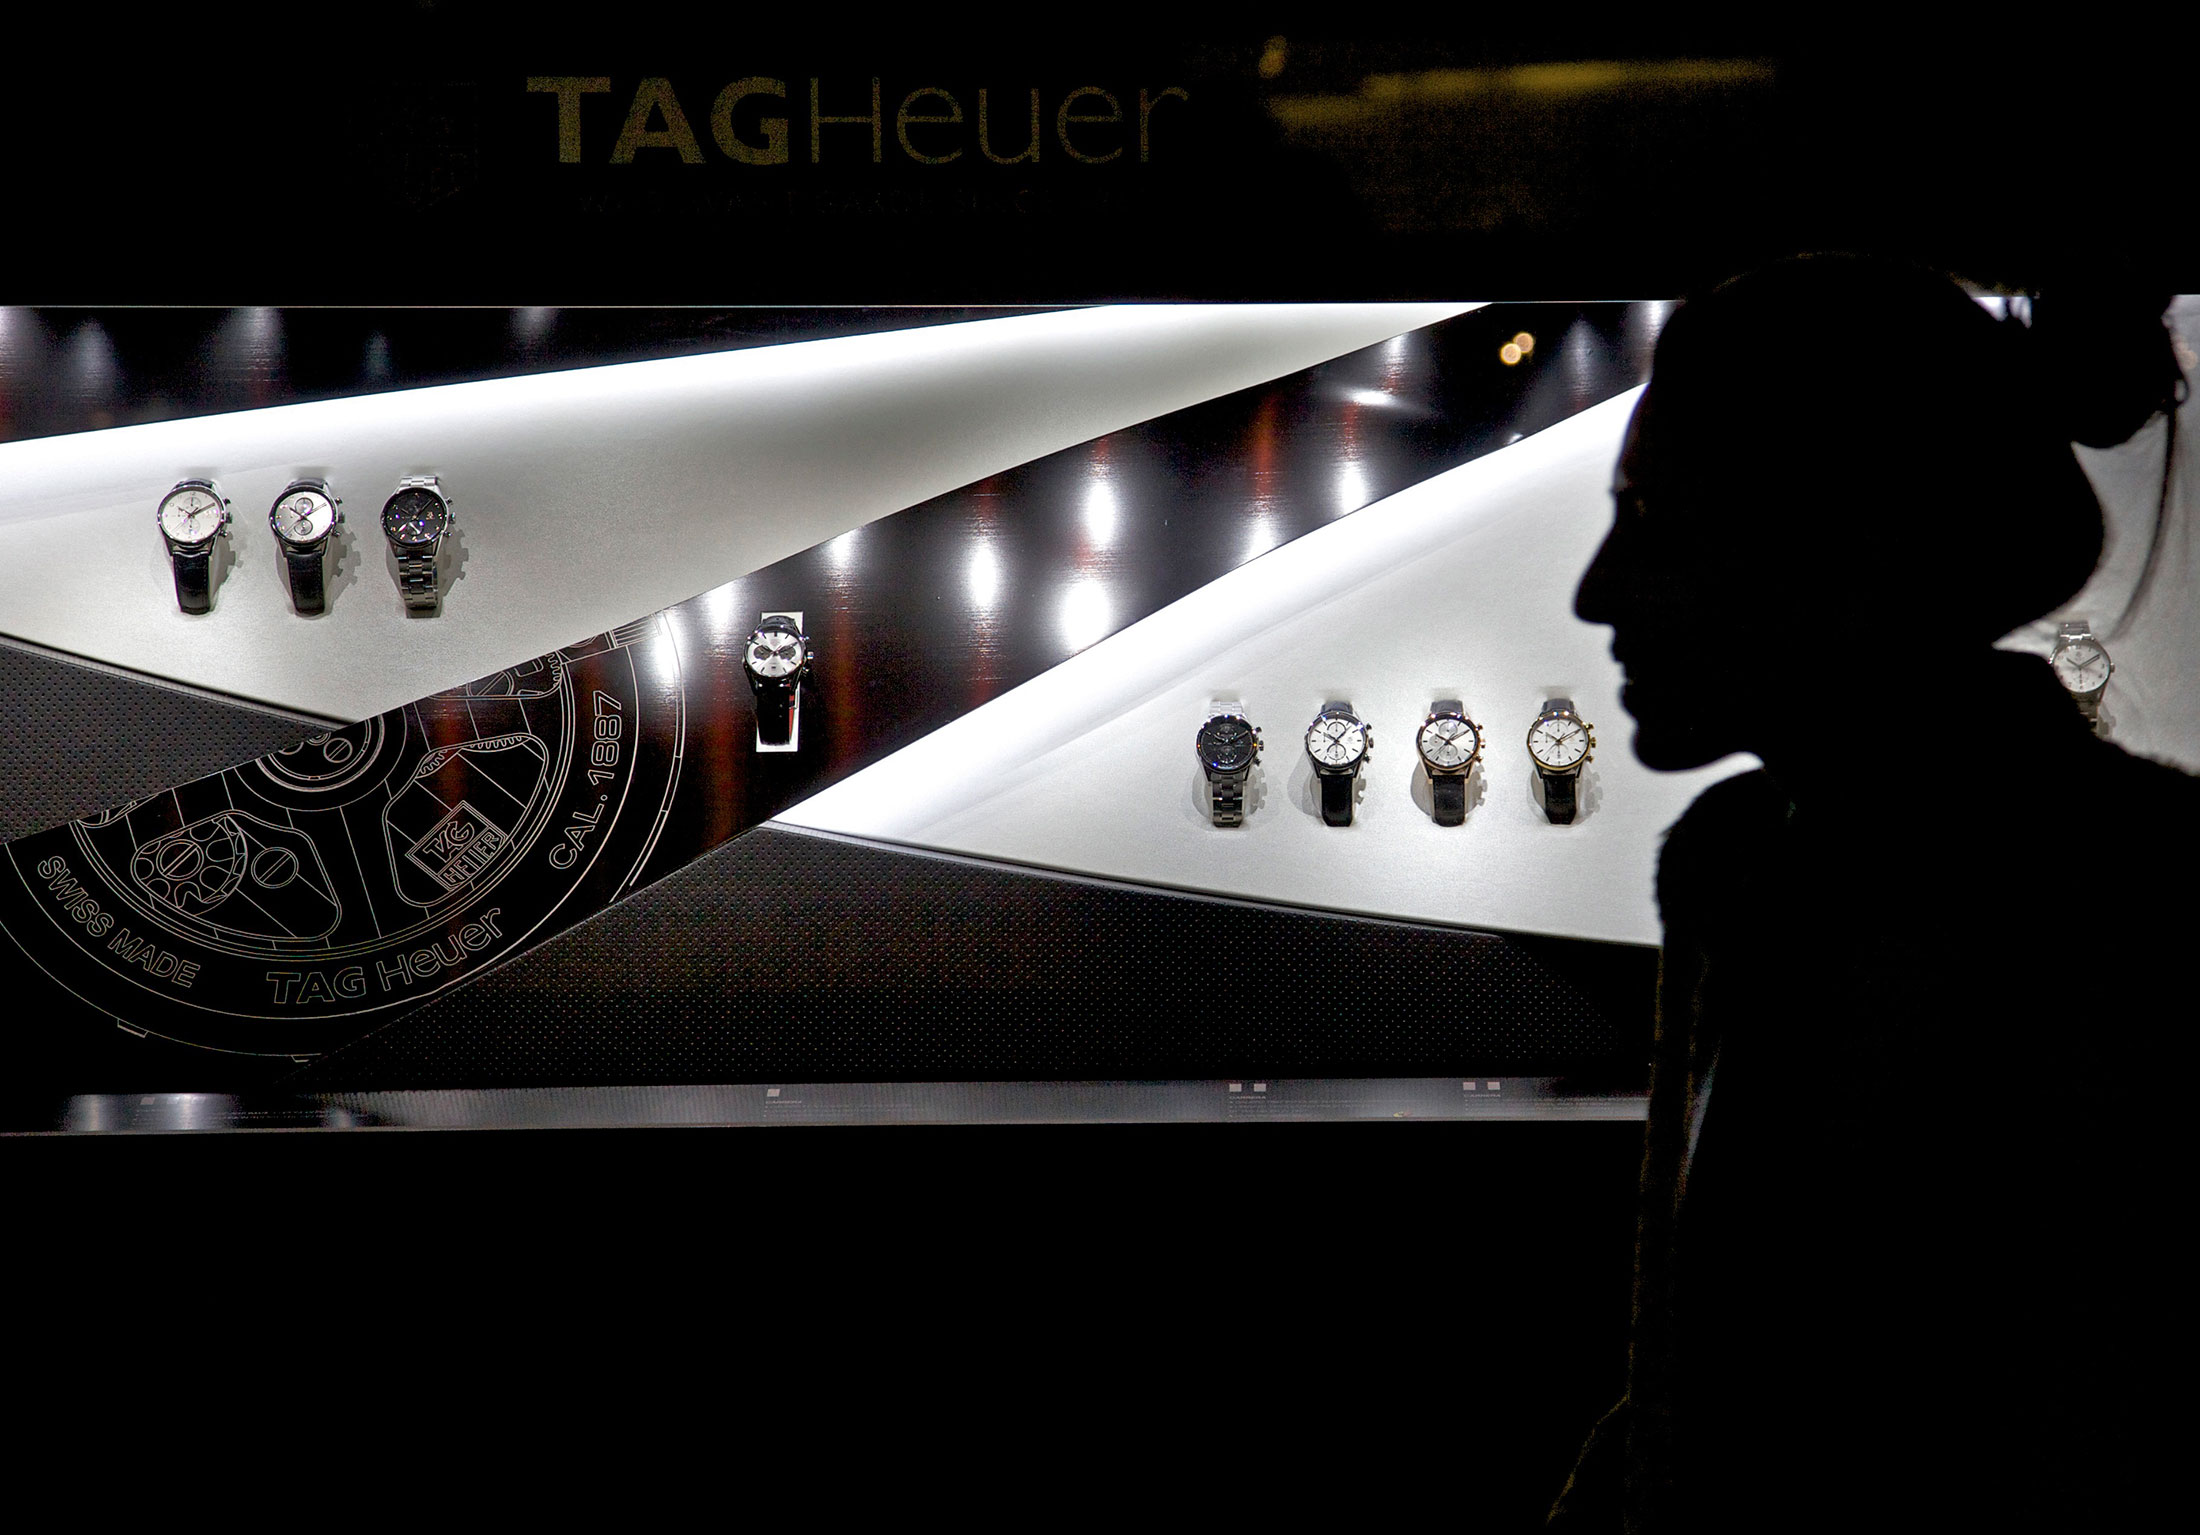 LVMH to Begin Selling $1,400 TAG Heuer Smartwatch by November - Bloomberg